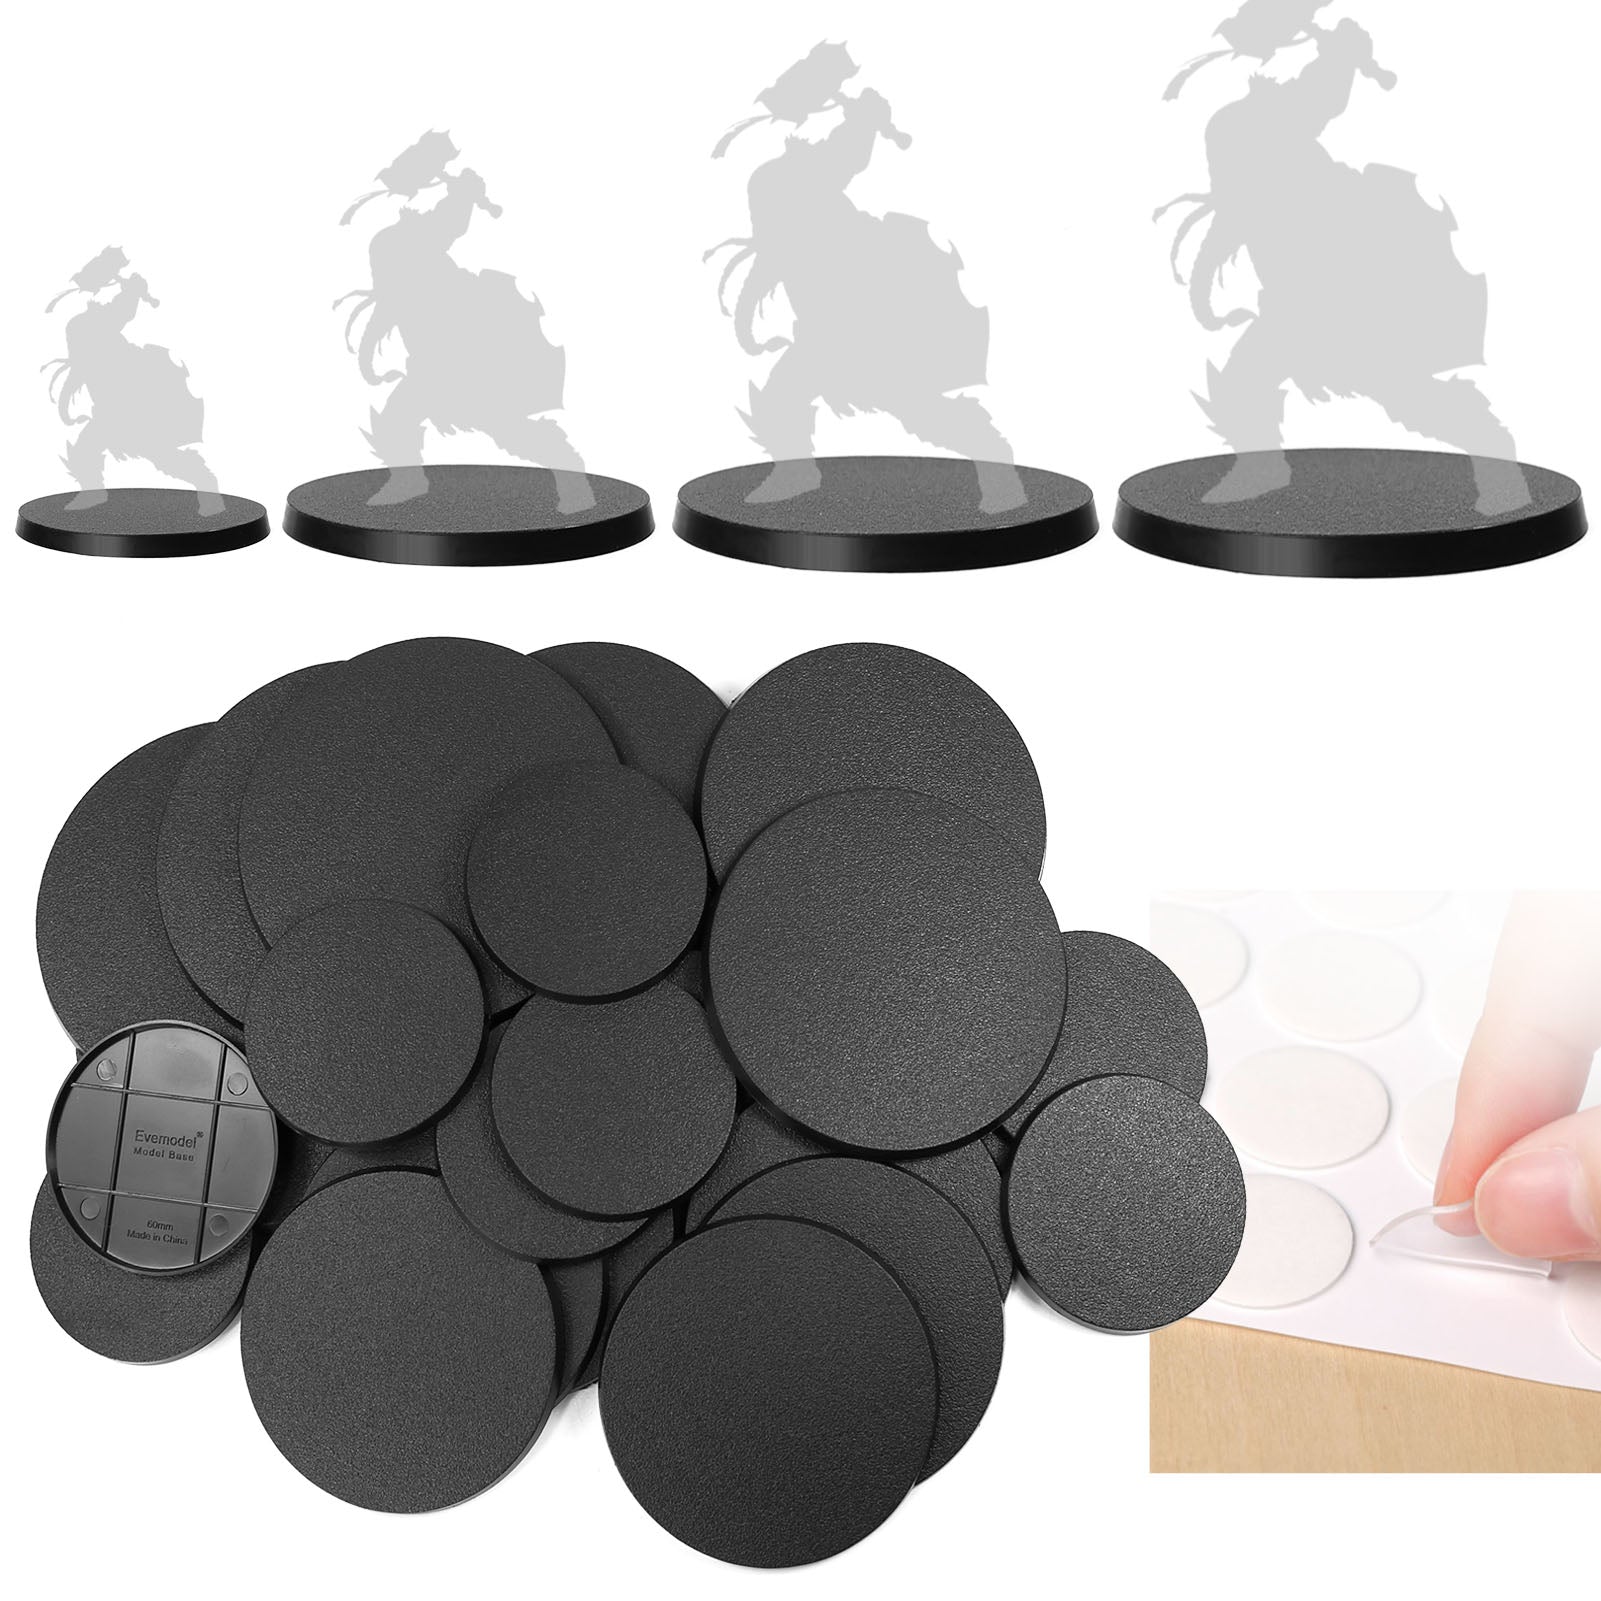 MB11 Various Size 60mm 80mm 90mm 100mm Round ABS Model Bases for Wargames Table Games